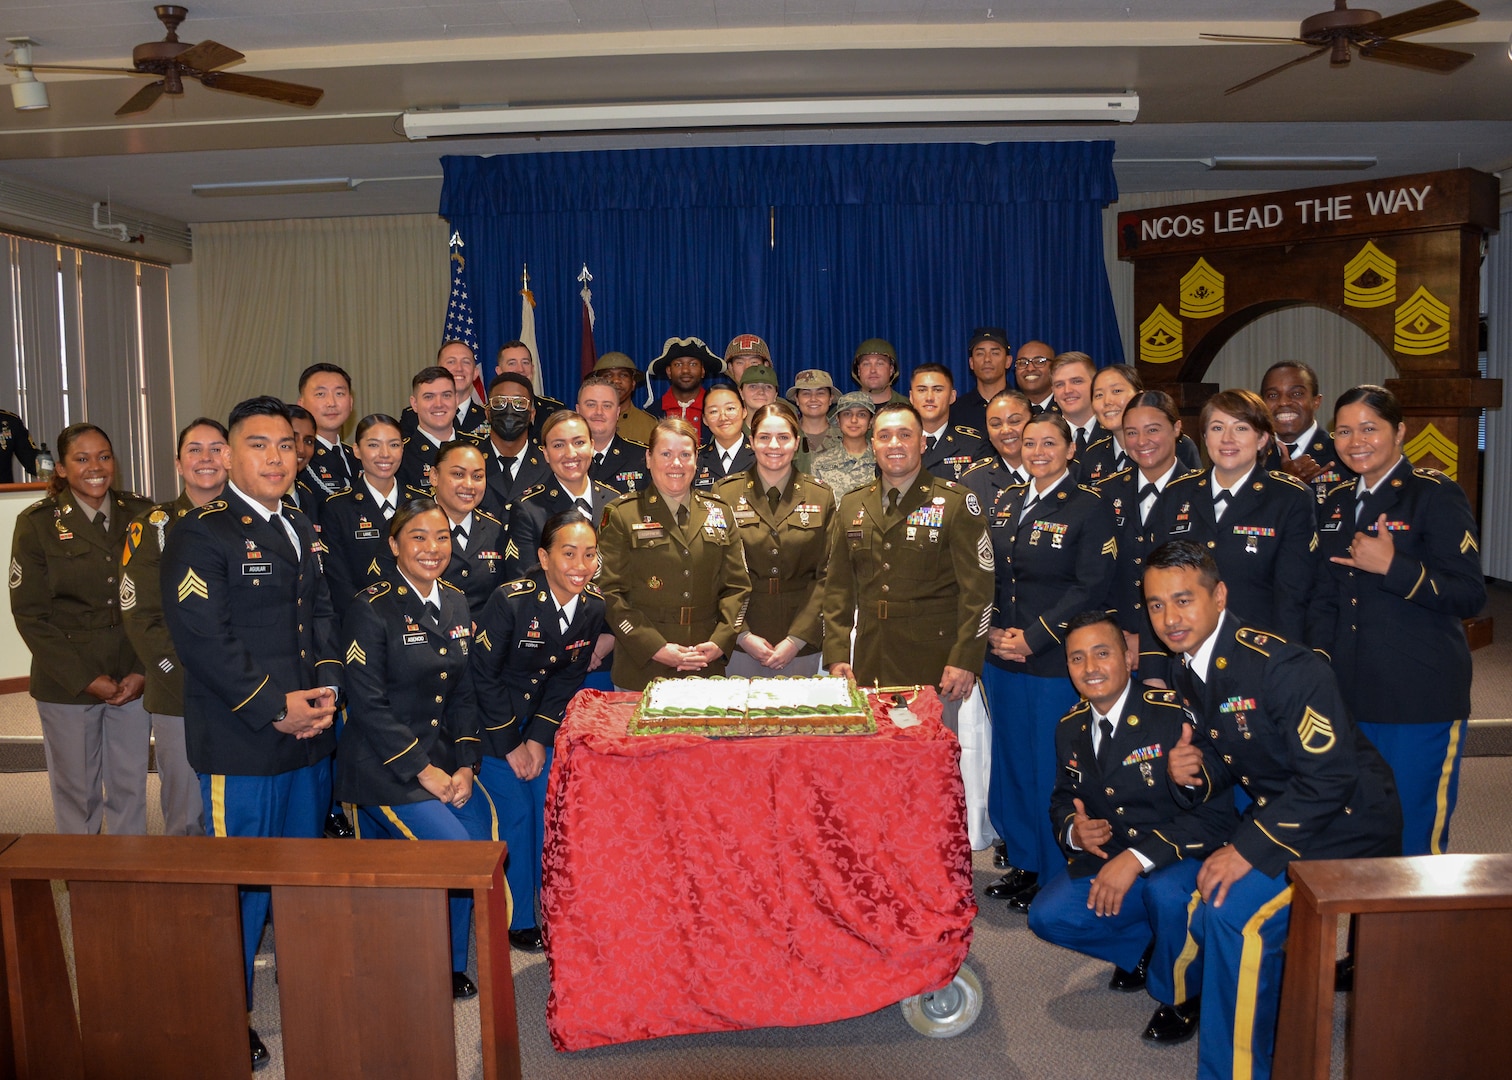 Twenty-six Soldiers from Tripler participated in a Noncommissioned Officer (NCO) induction ceremony at the TAMC Chapel. The ceremony is a time-honored tradition which welcoming newly promoted NCOs to the corps.